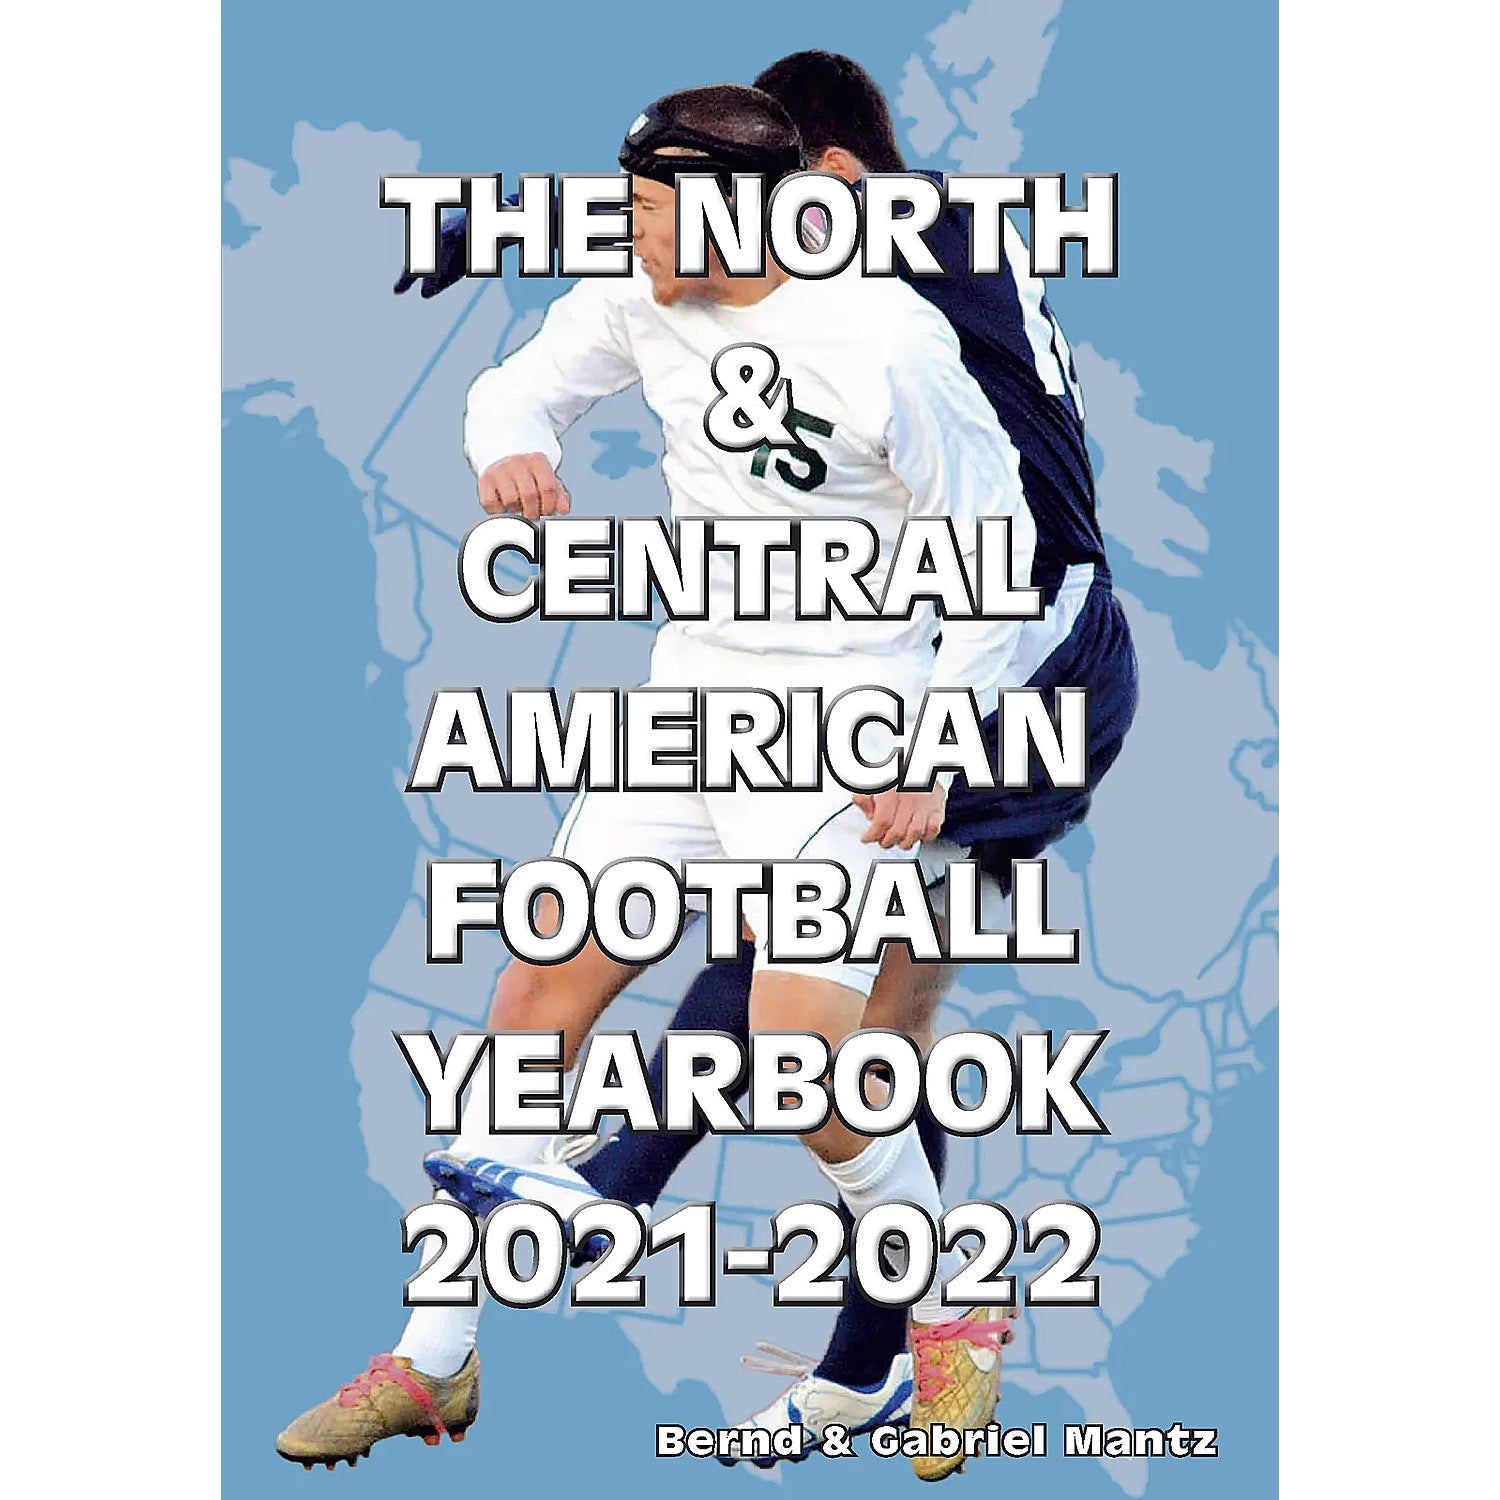 The North & Central American Football Yearbook 2021-2022